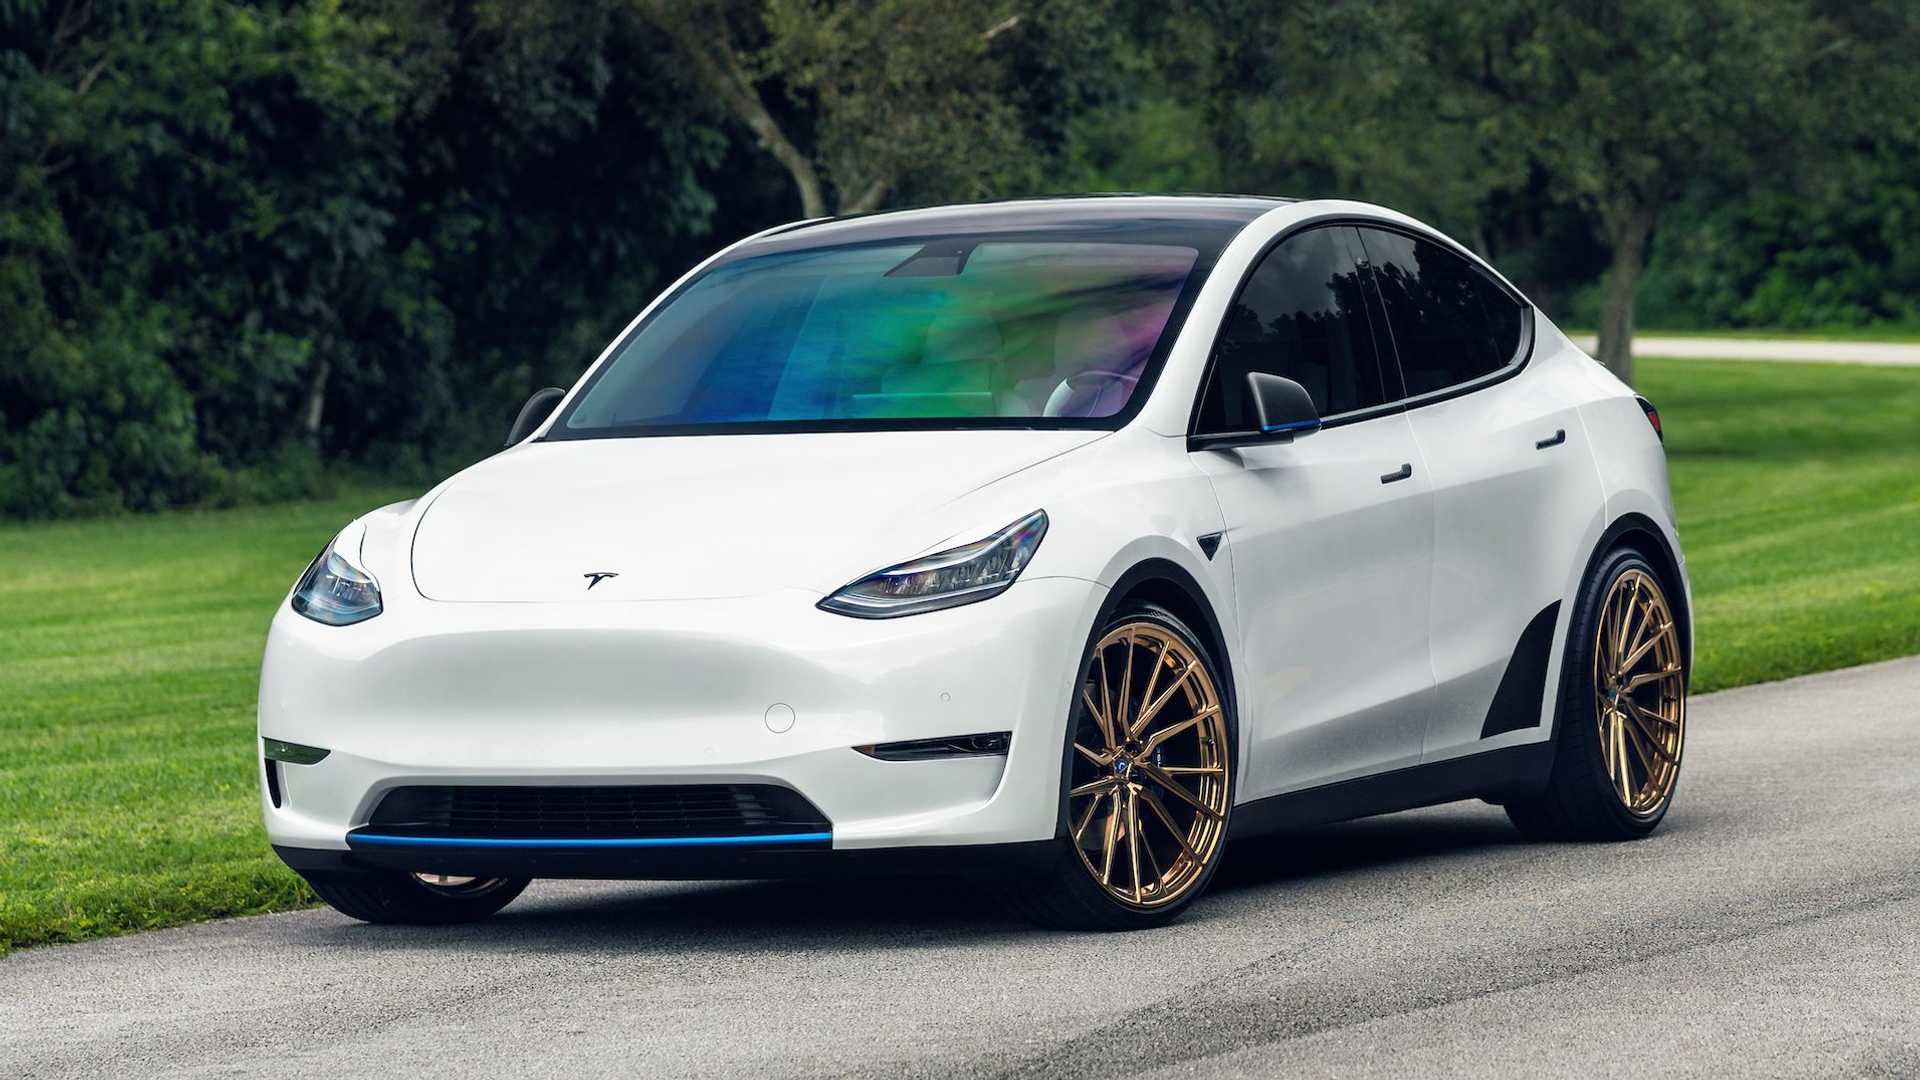 Tesla Model Y - After 5 days, Tesla raises prices again in China